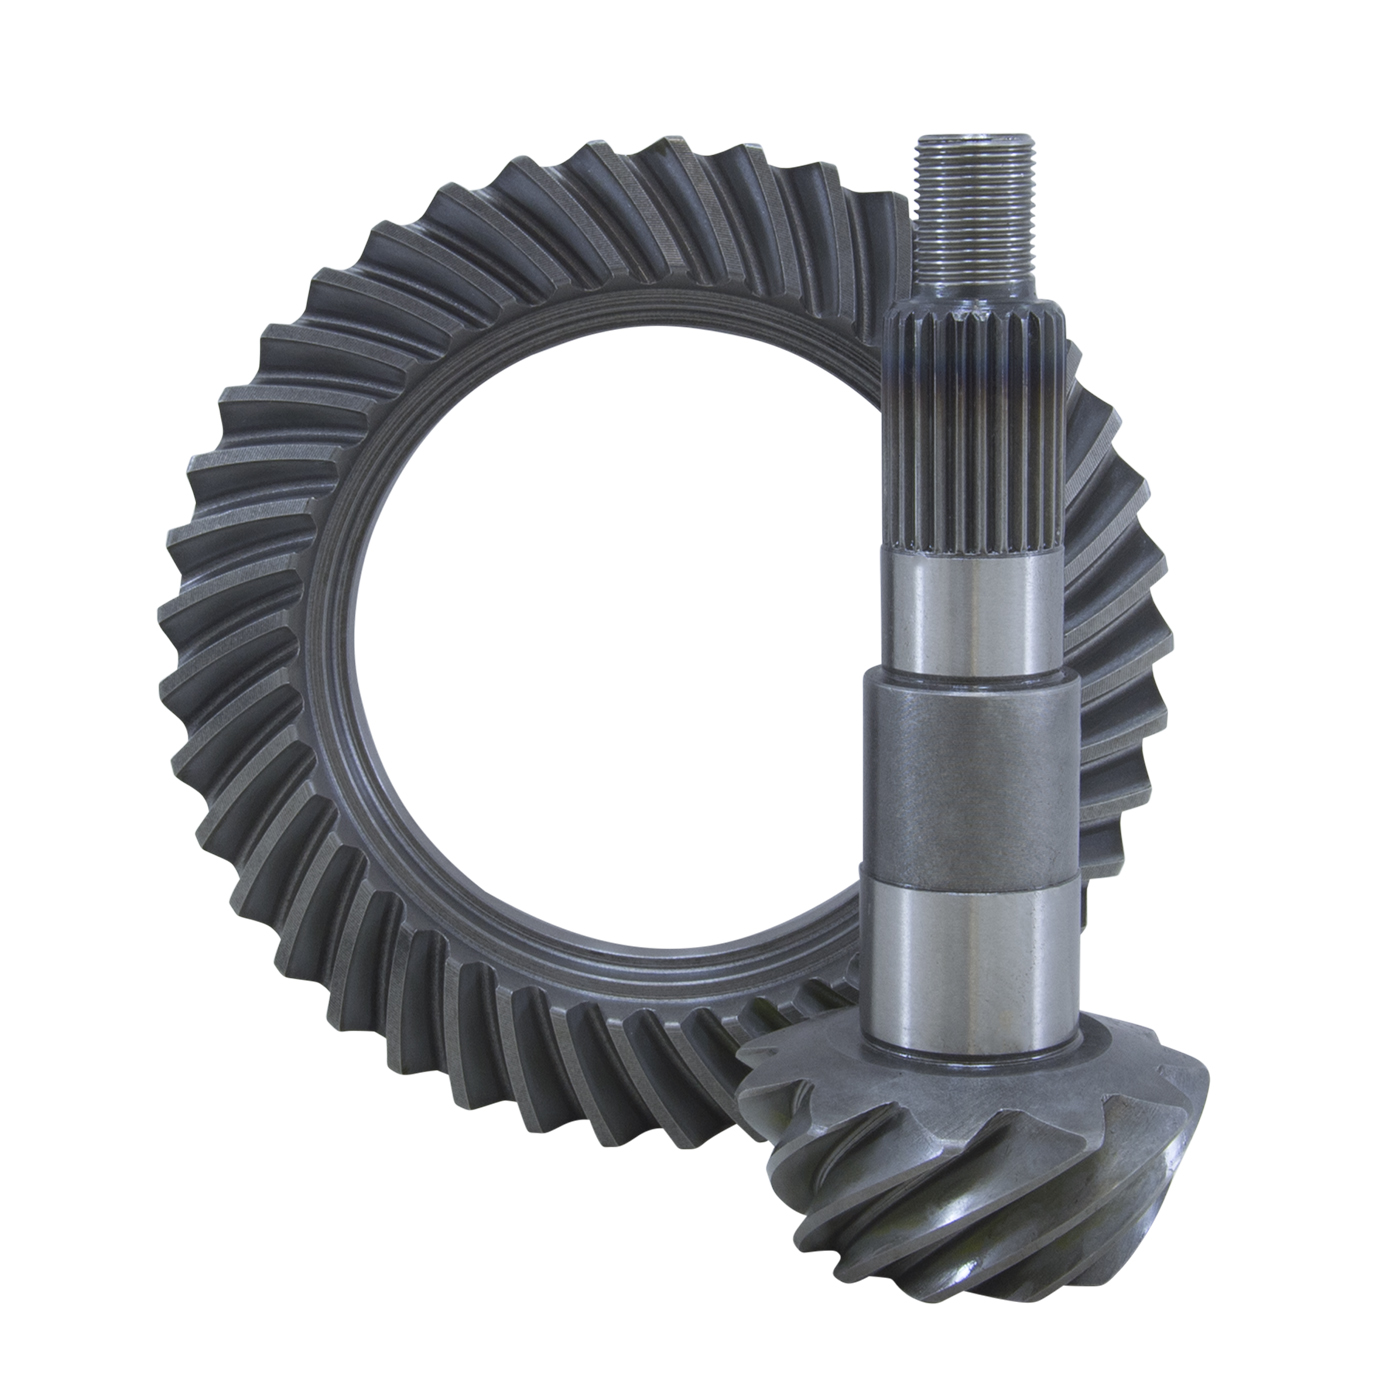 High performance Yukon Ring  Pinion replacement gear set for Dana 30  Reverse rotation in a 4.56 ratio YG D30R-456R Usa Standard Gear